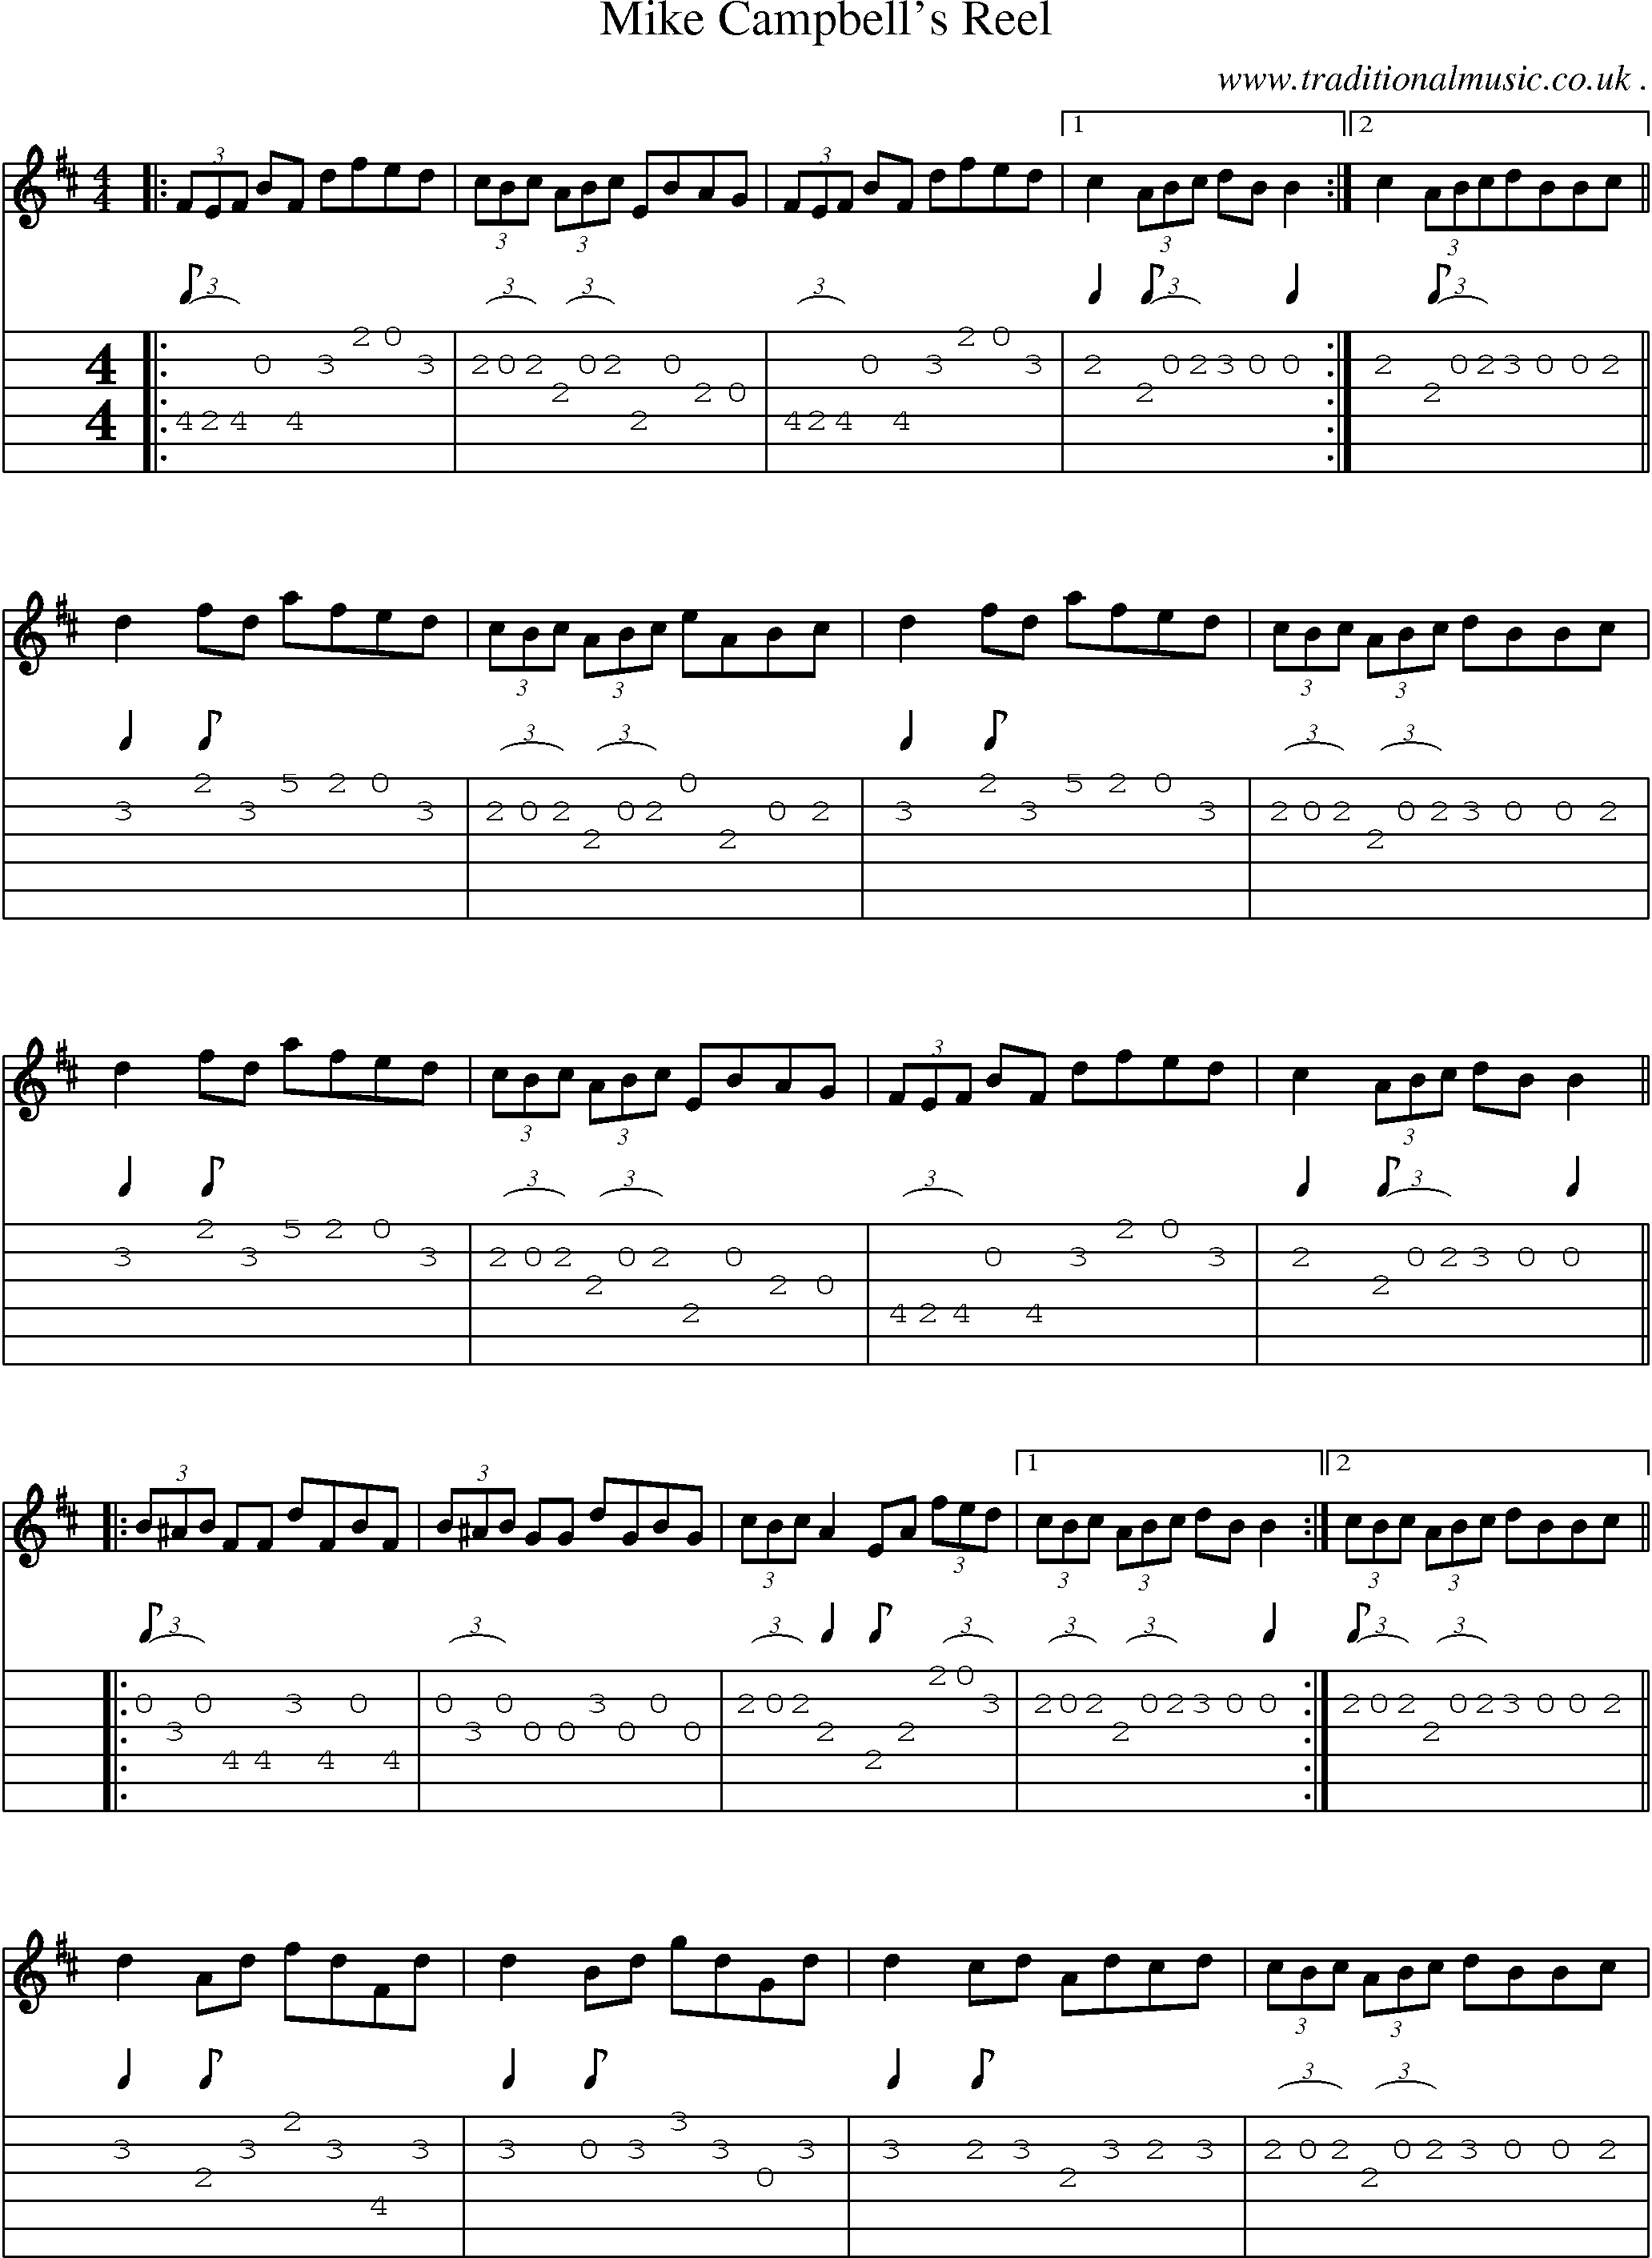 Sheet-Music and Guitar Tabs for Mike Campbells Reel